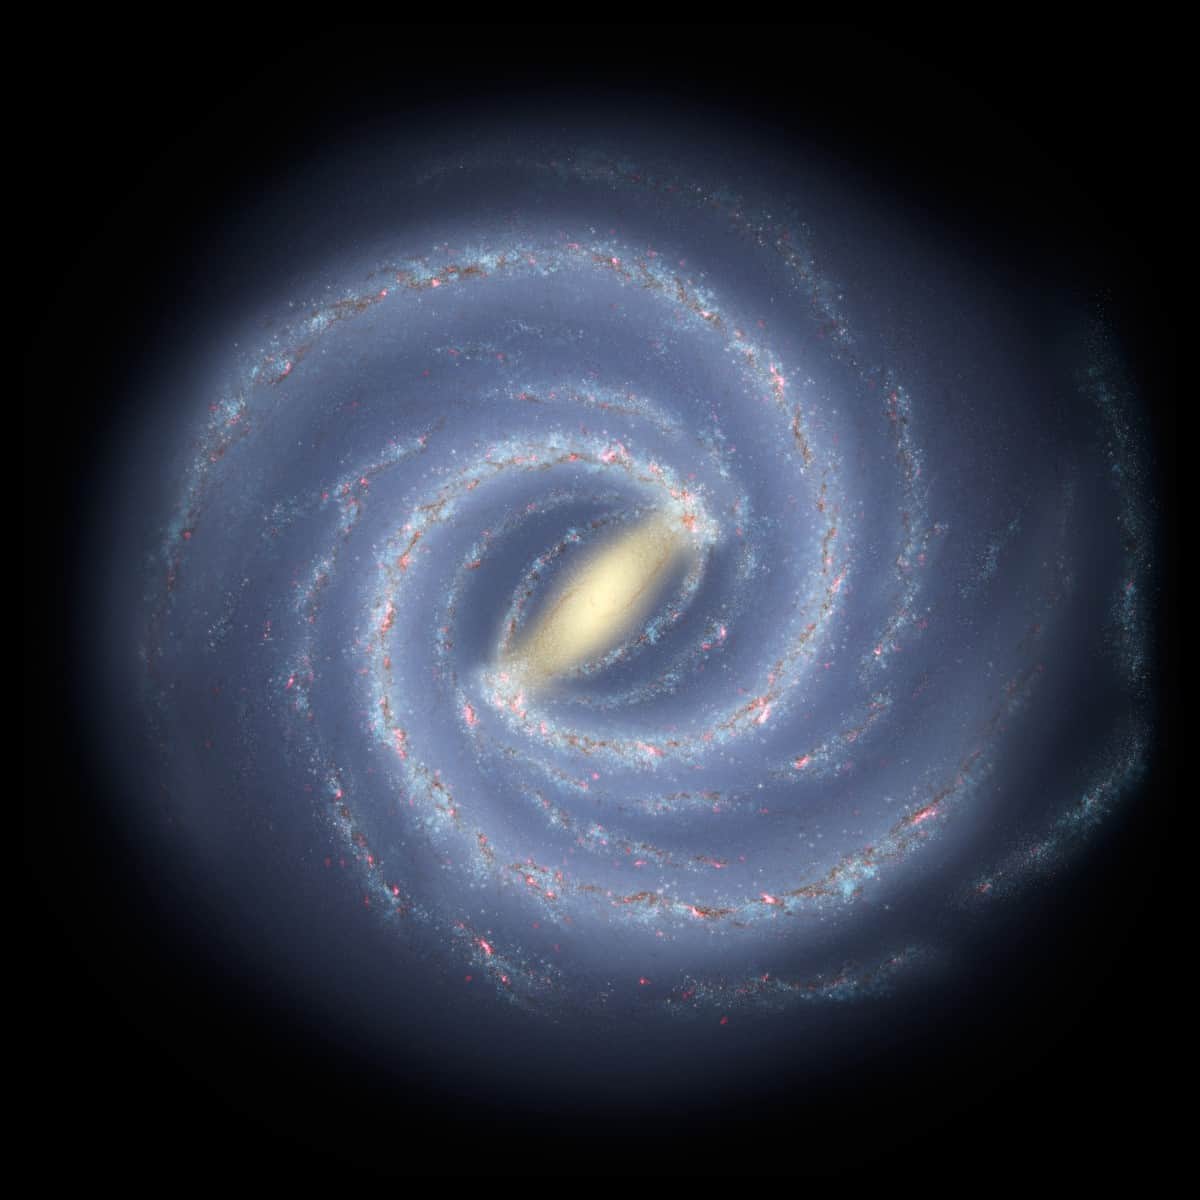 Artistic impression of the Milky Way